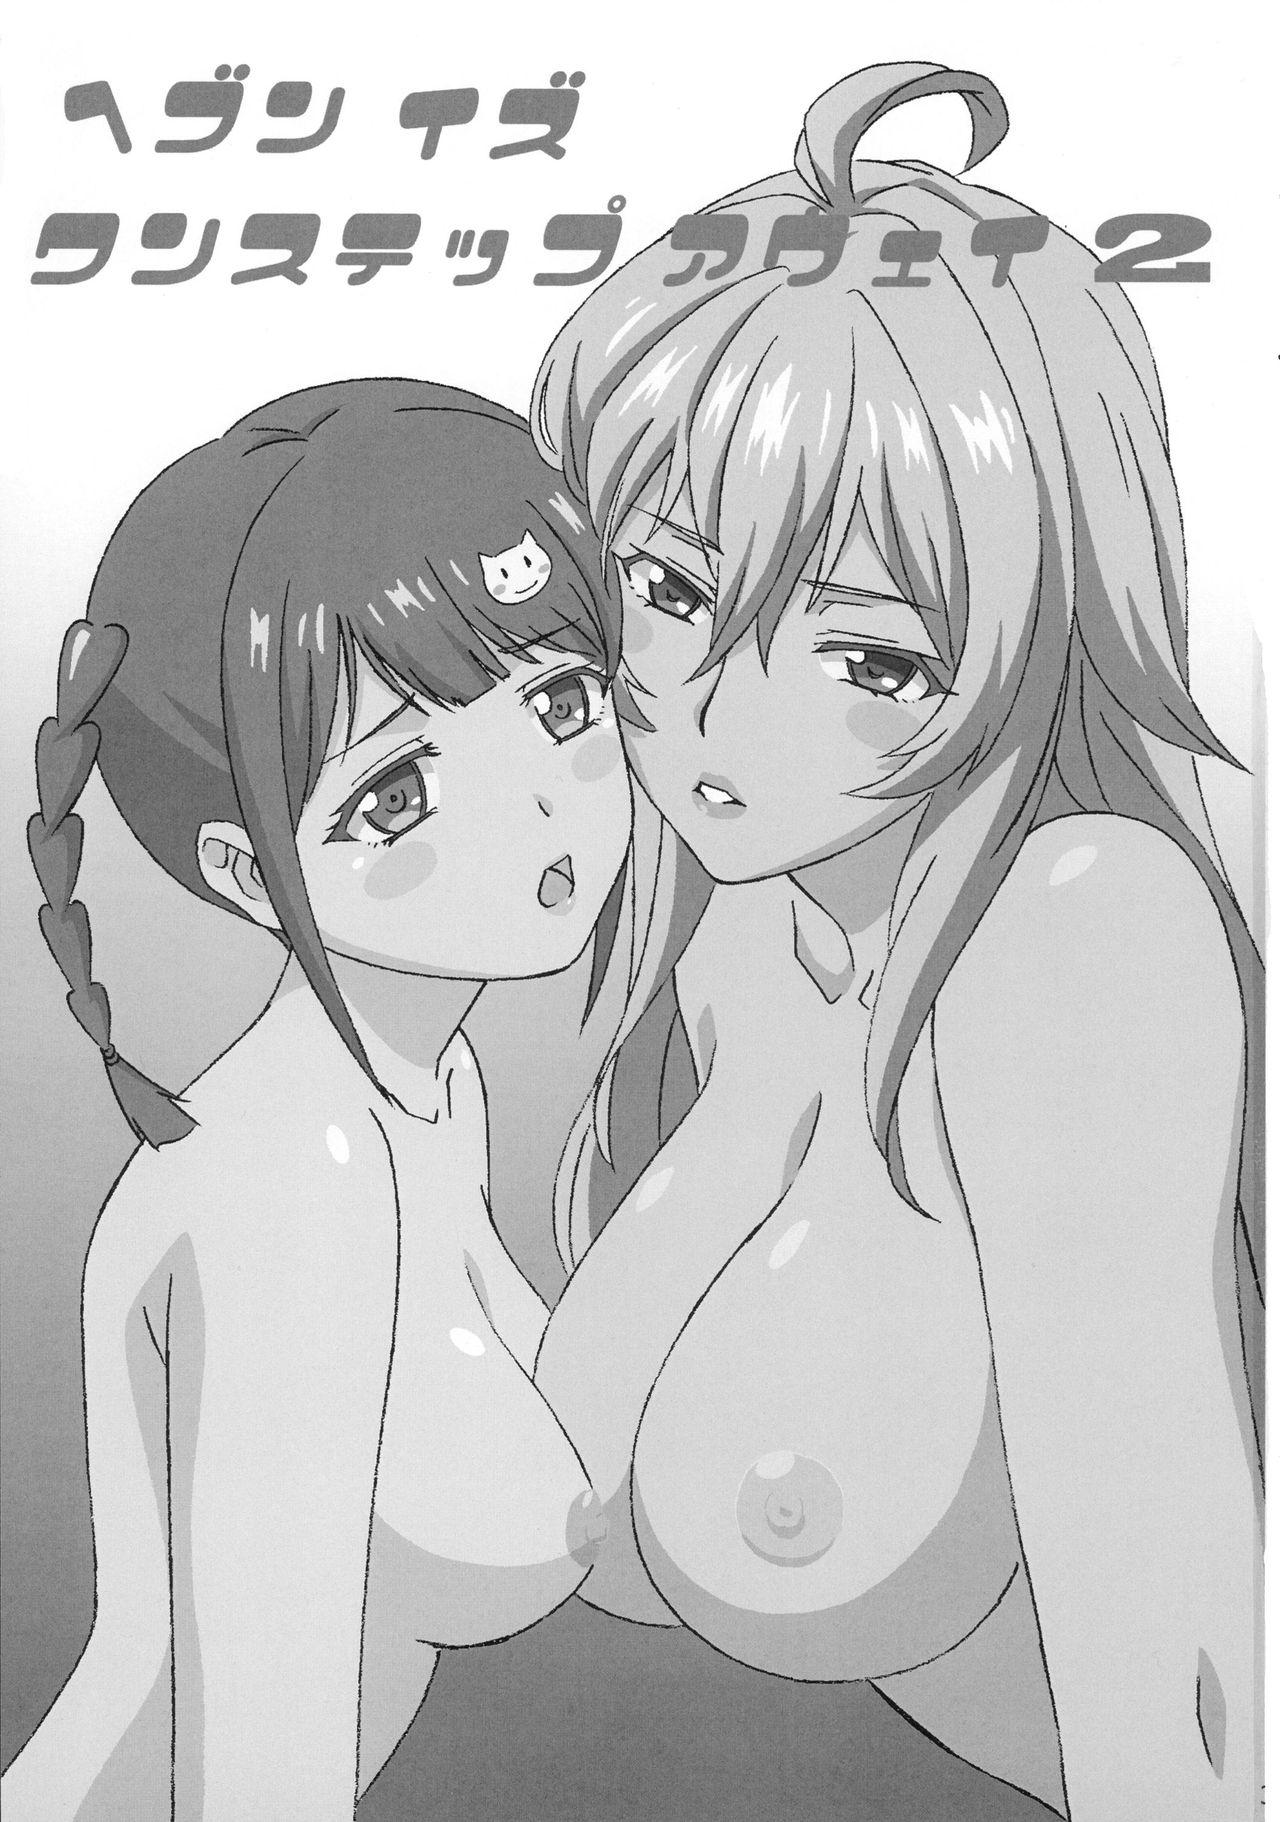 Free Blowjob Porn Heaven is one step away 2 - Valkyrie drive Big Cock - Page 3